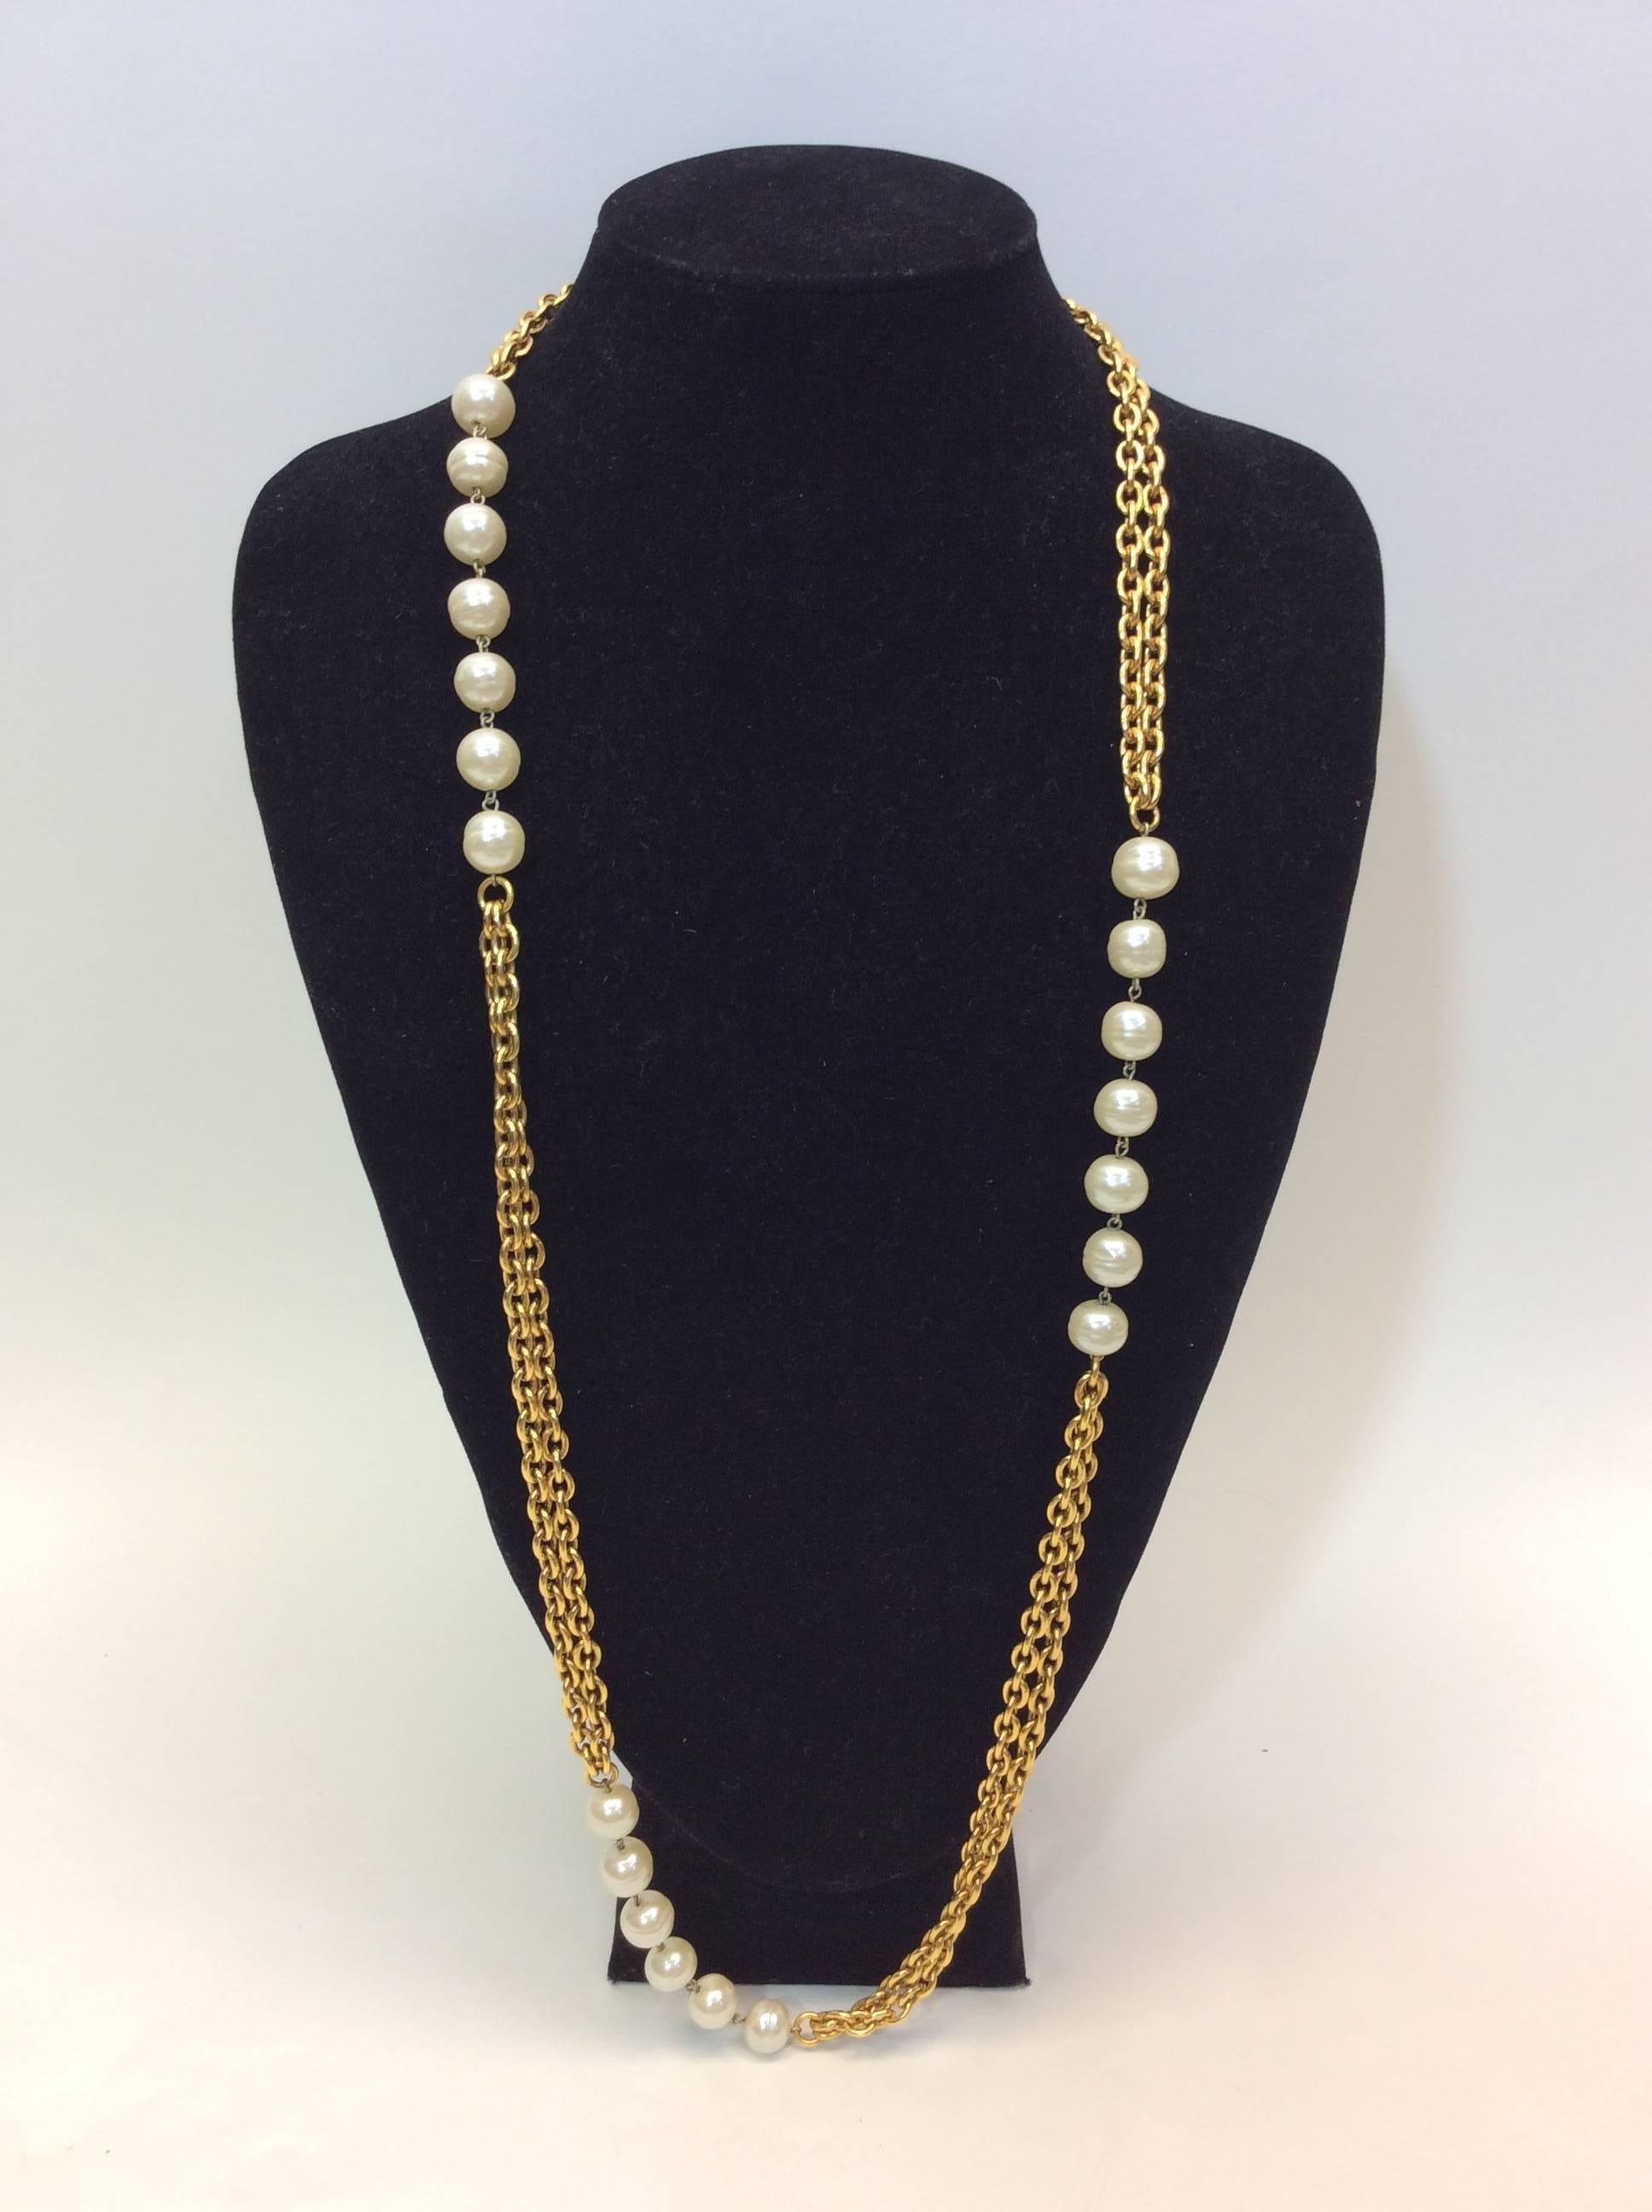 Gold Plated Chain Necklace with Pearl Details
40 inch chain length
Sterling silver with less than 10k gold plating
Pearl strings between double chain sections